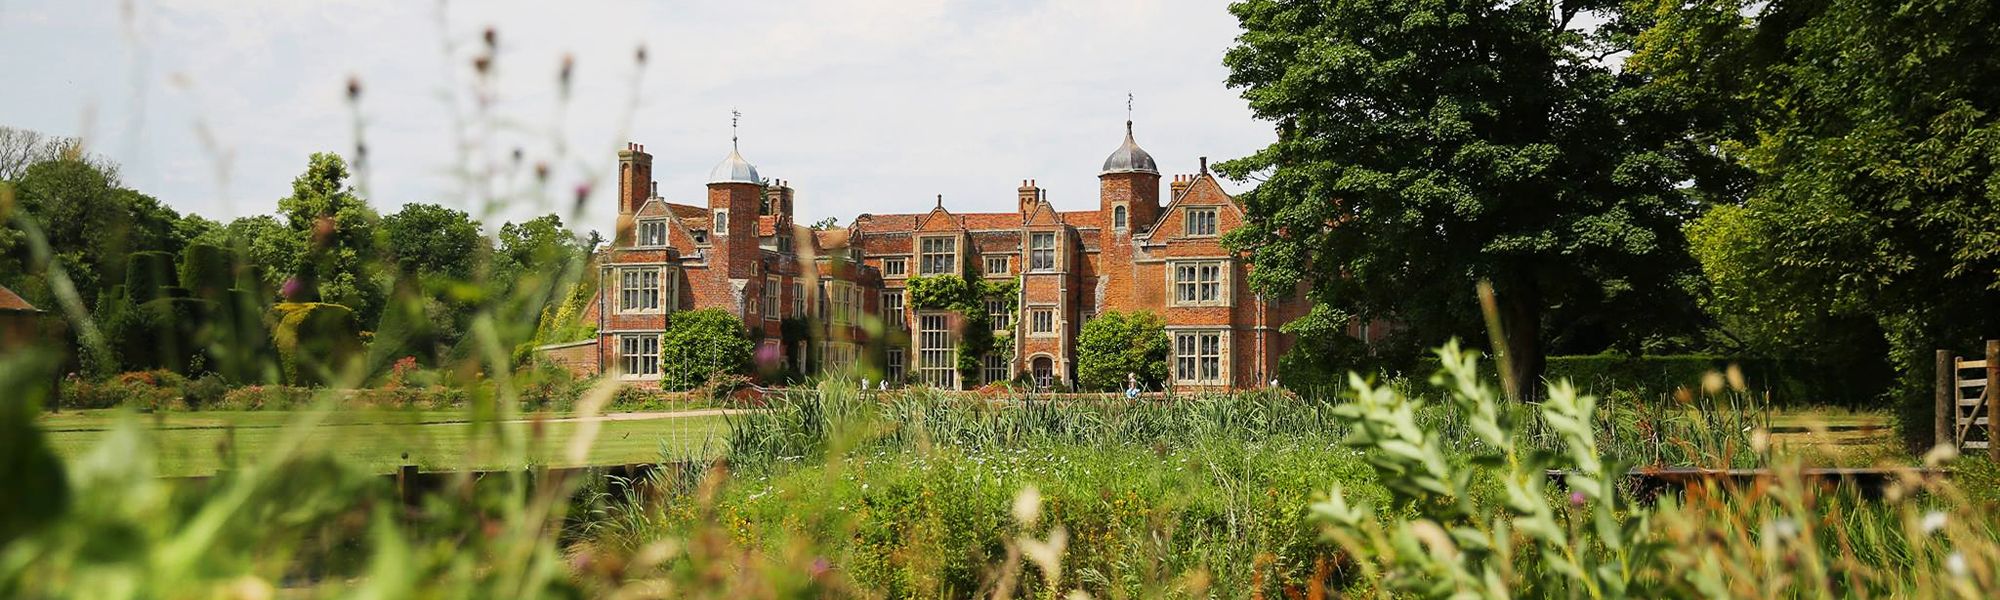 tourhub | Just Go Holidays | Natural Beauty & Architectural Splendours of Suffolk 